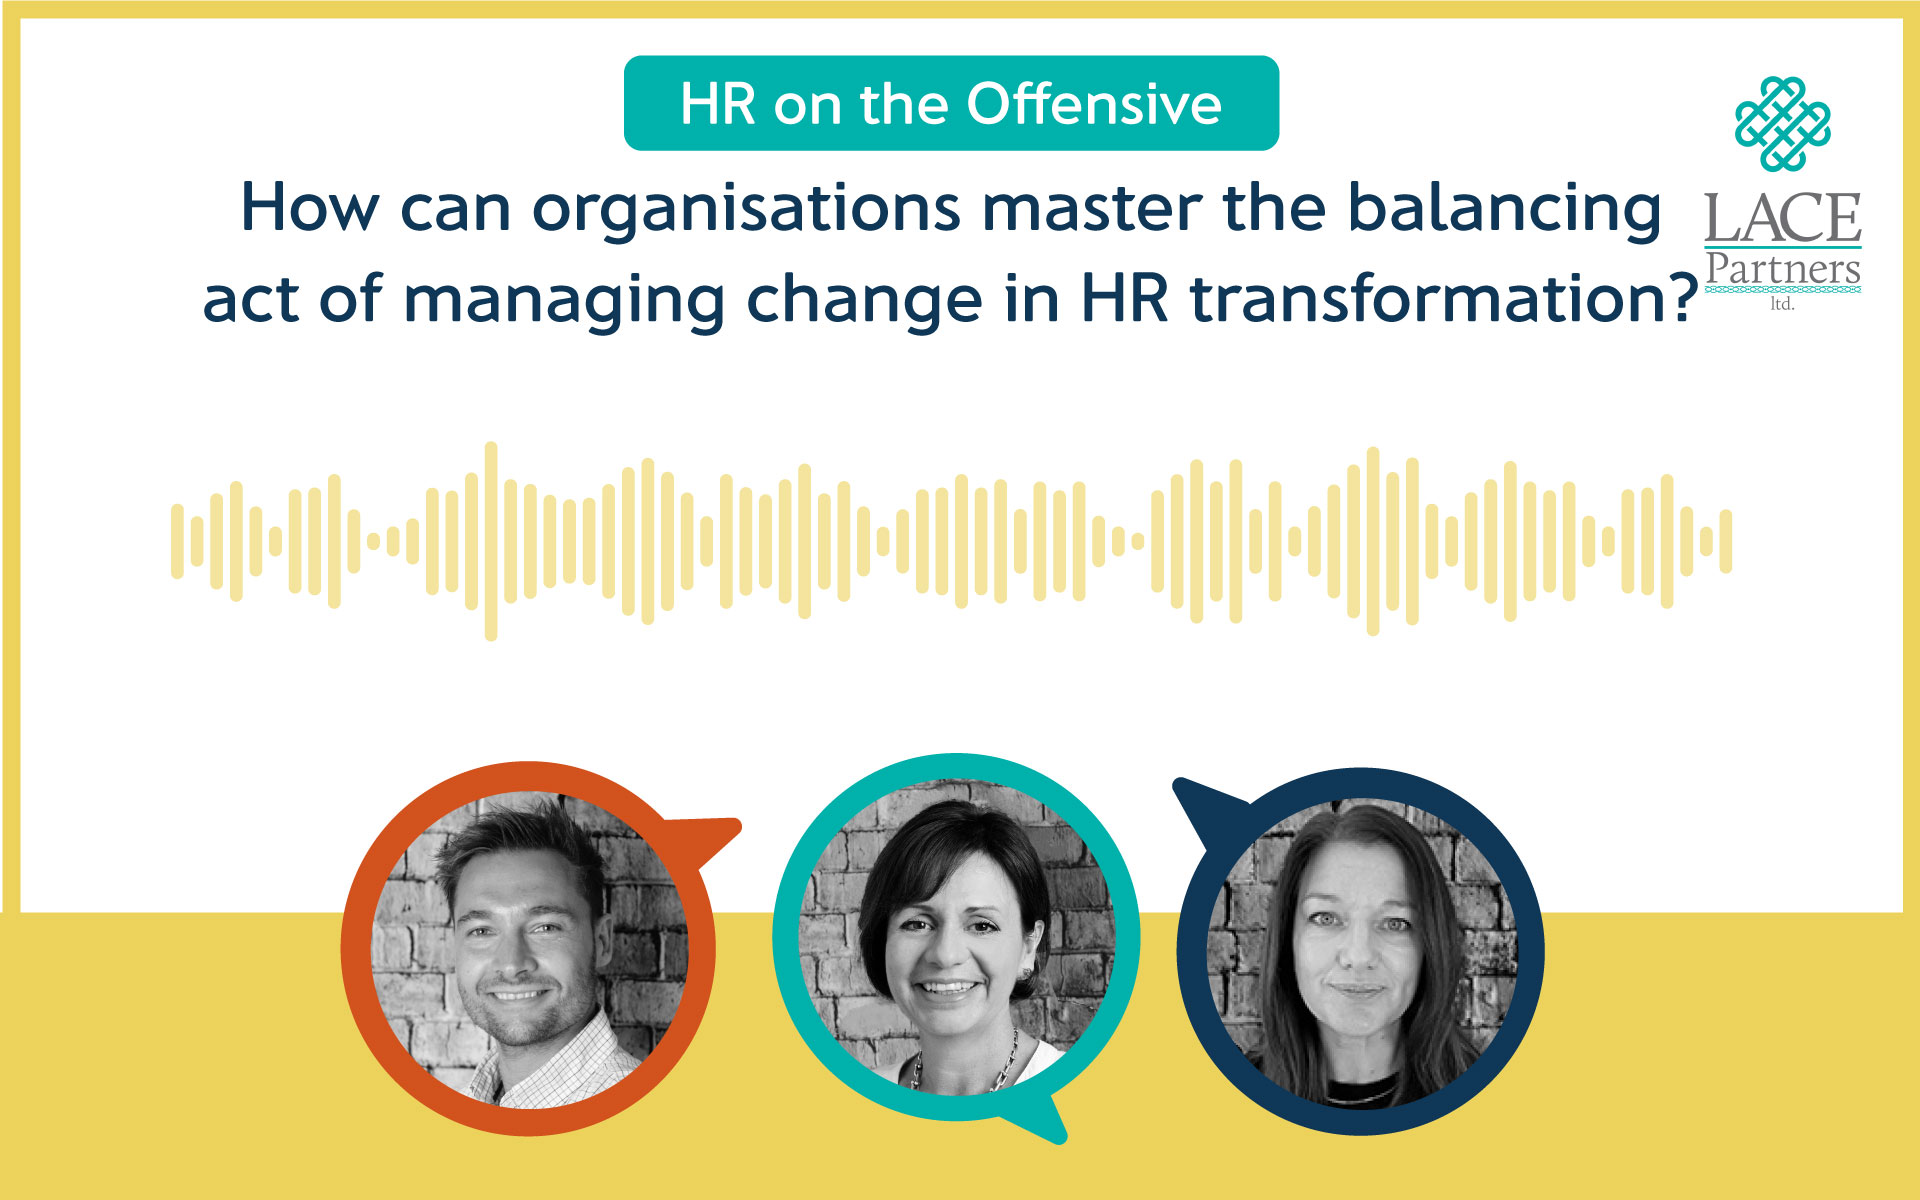 How can organisations master the balancing act of managing change in HR transformation?